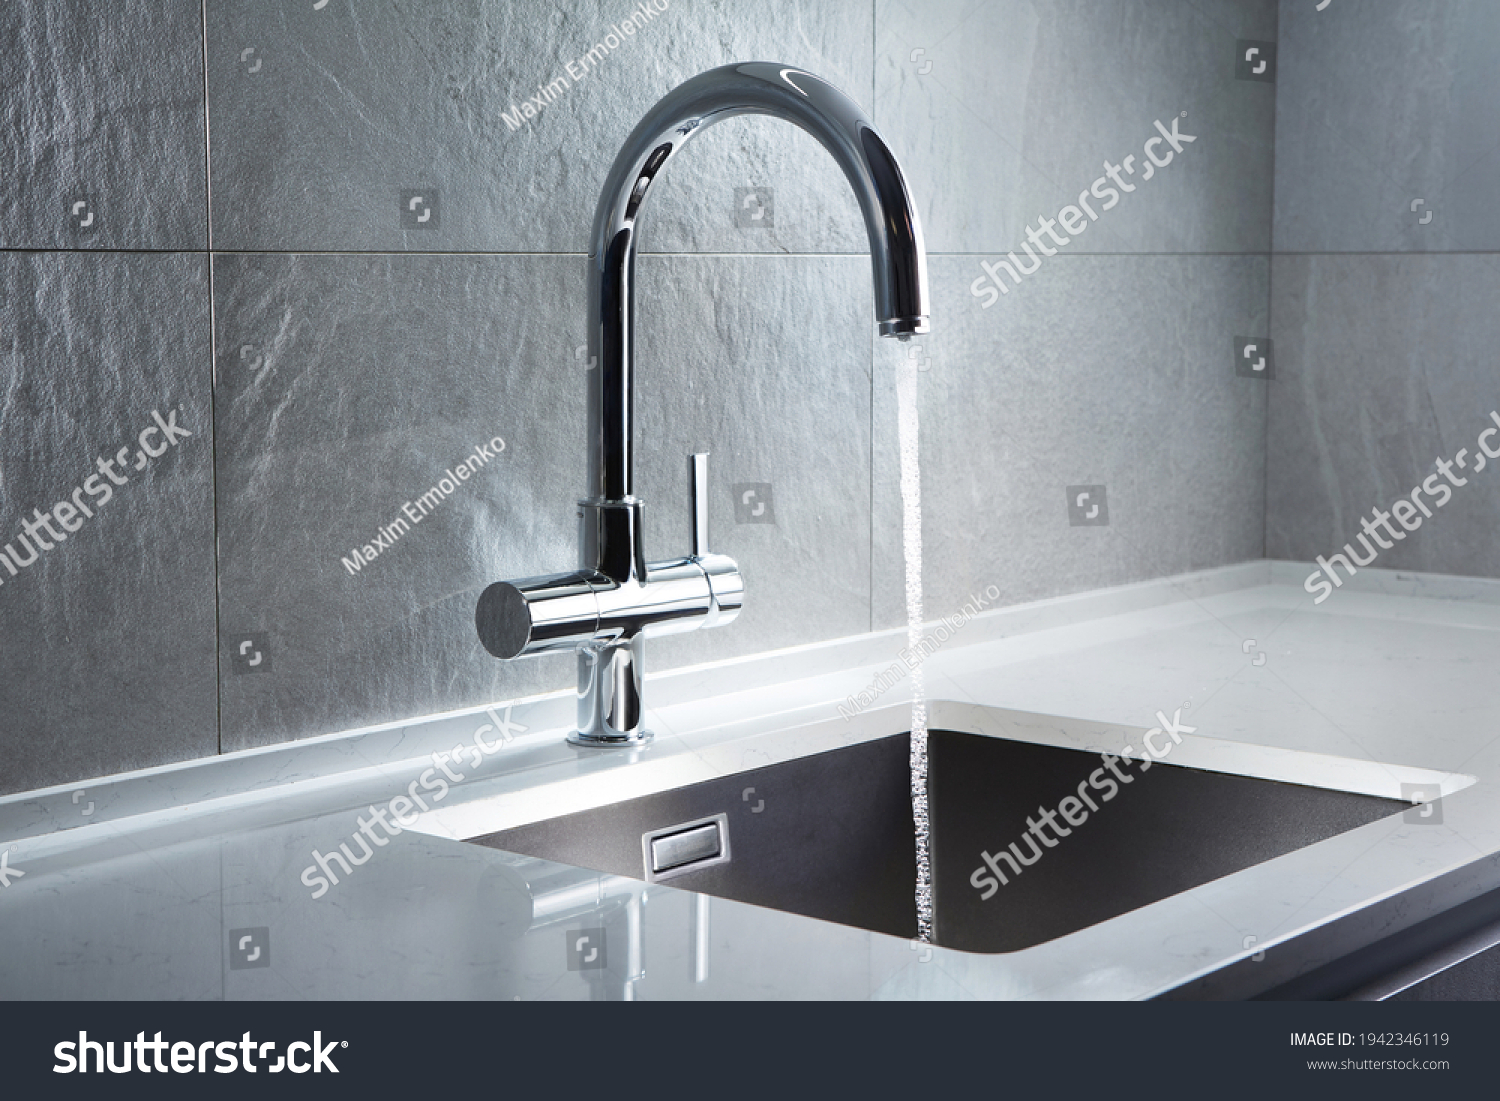 Kitchen water mixer. Water tap made of chrome material #1942346119